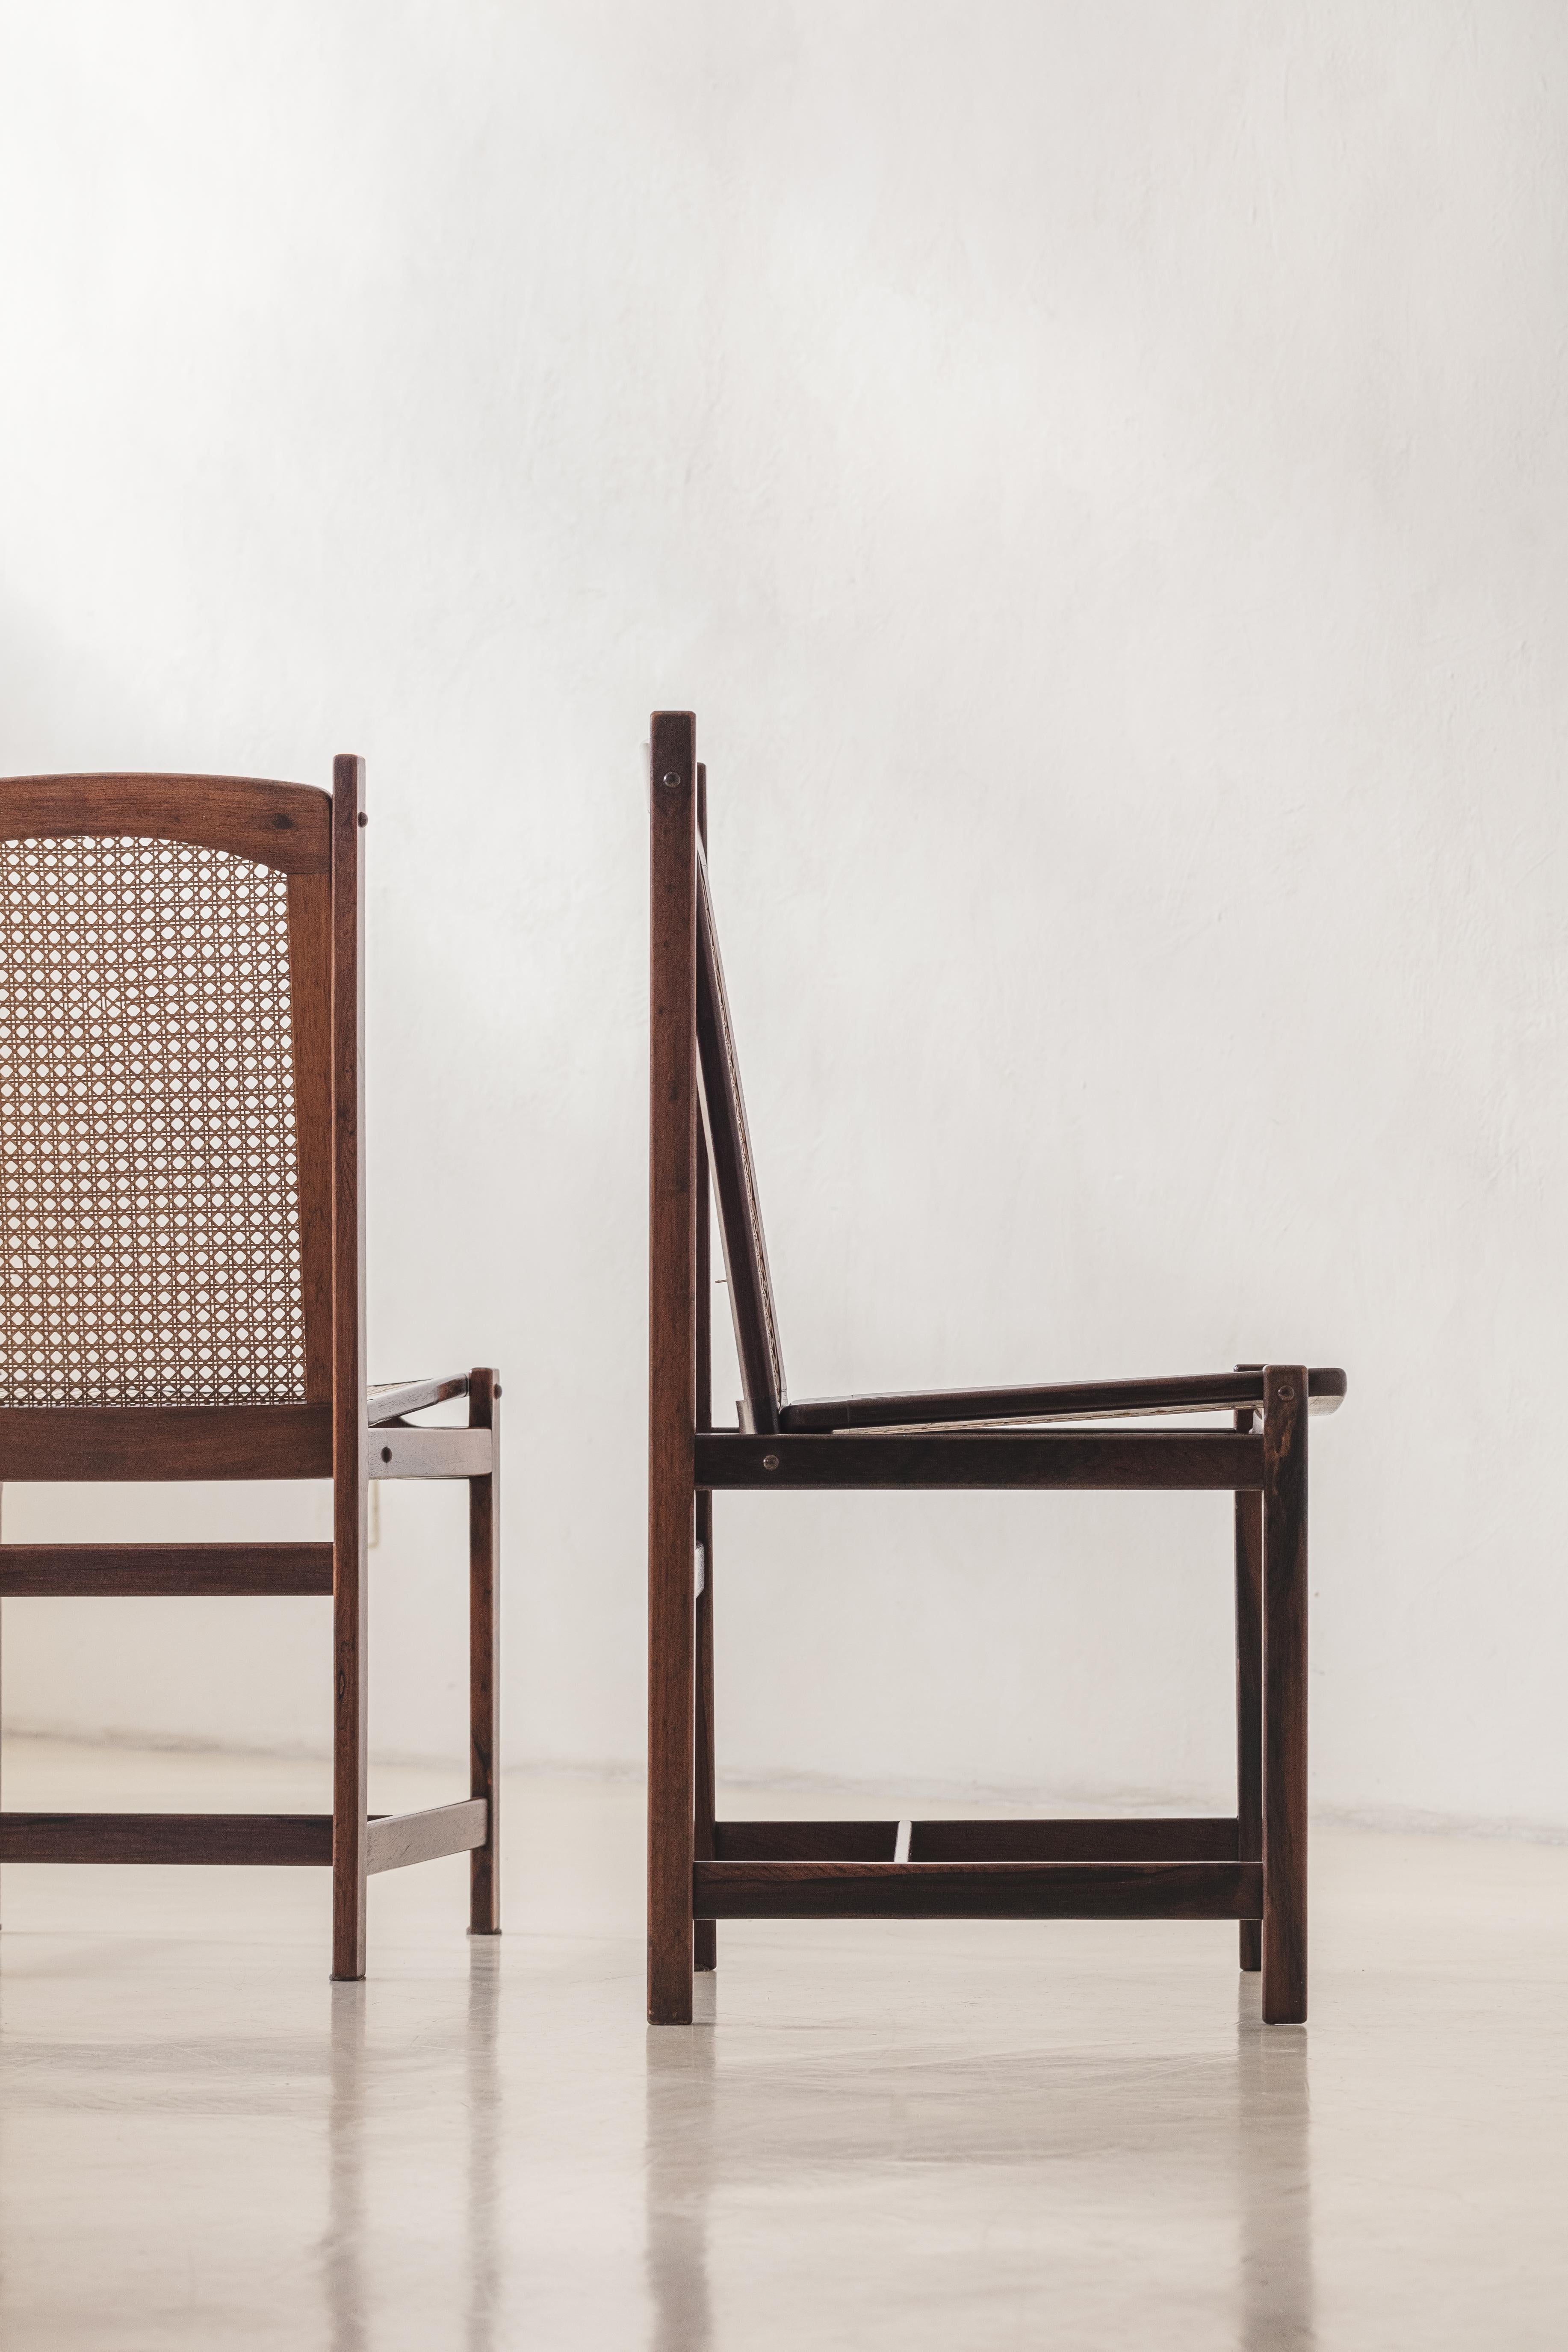 Celina Decorações Set of Six Dining Chairs, Rosewood and Cane, Midcentury 1960s For Sale 4